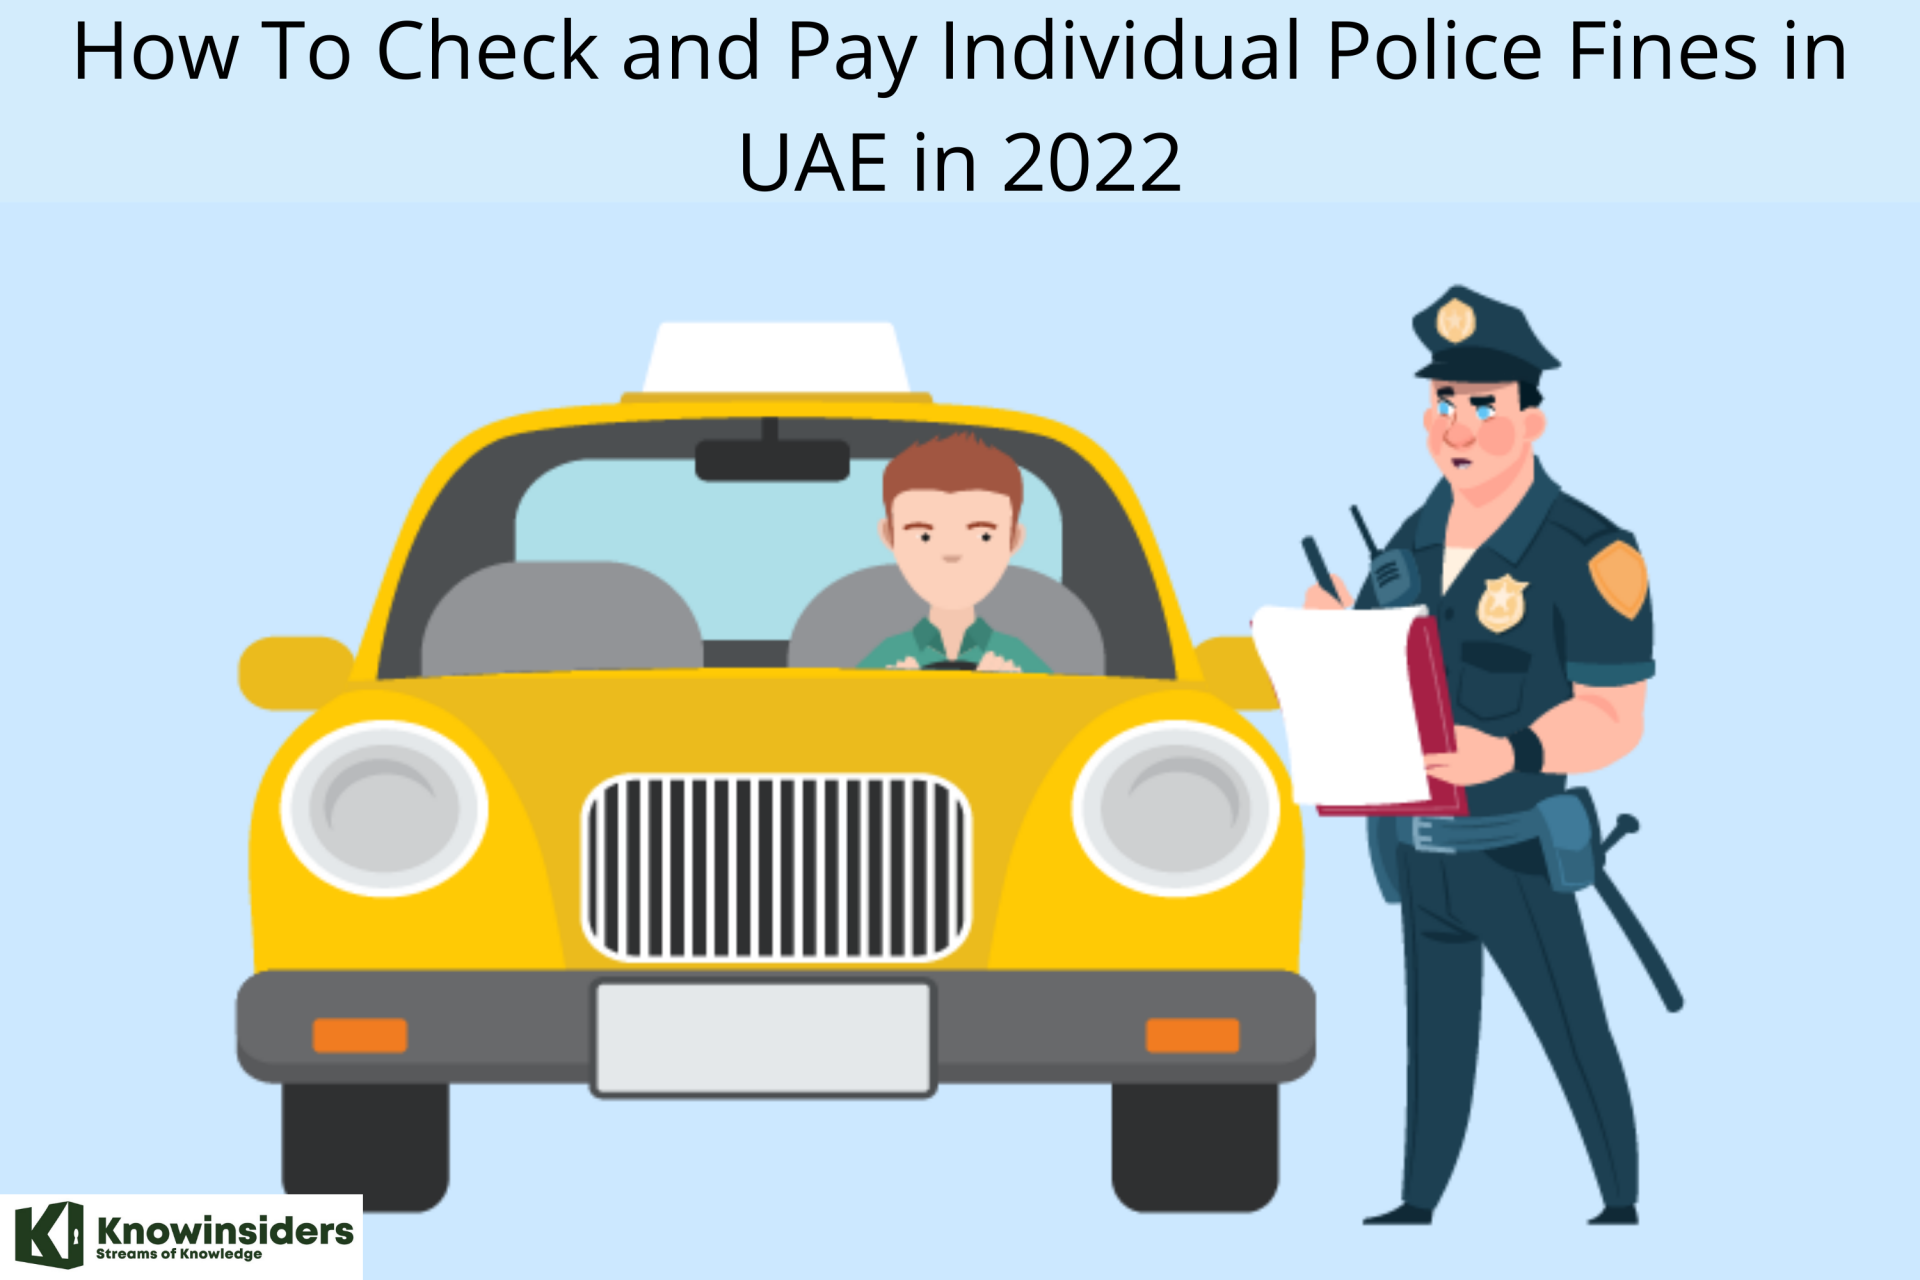 How To Check and Pay Individual Police Fines in UAE in 2022